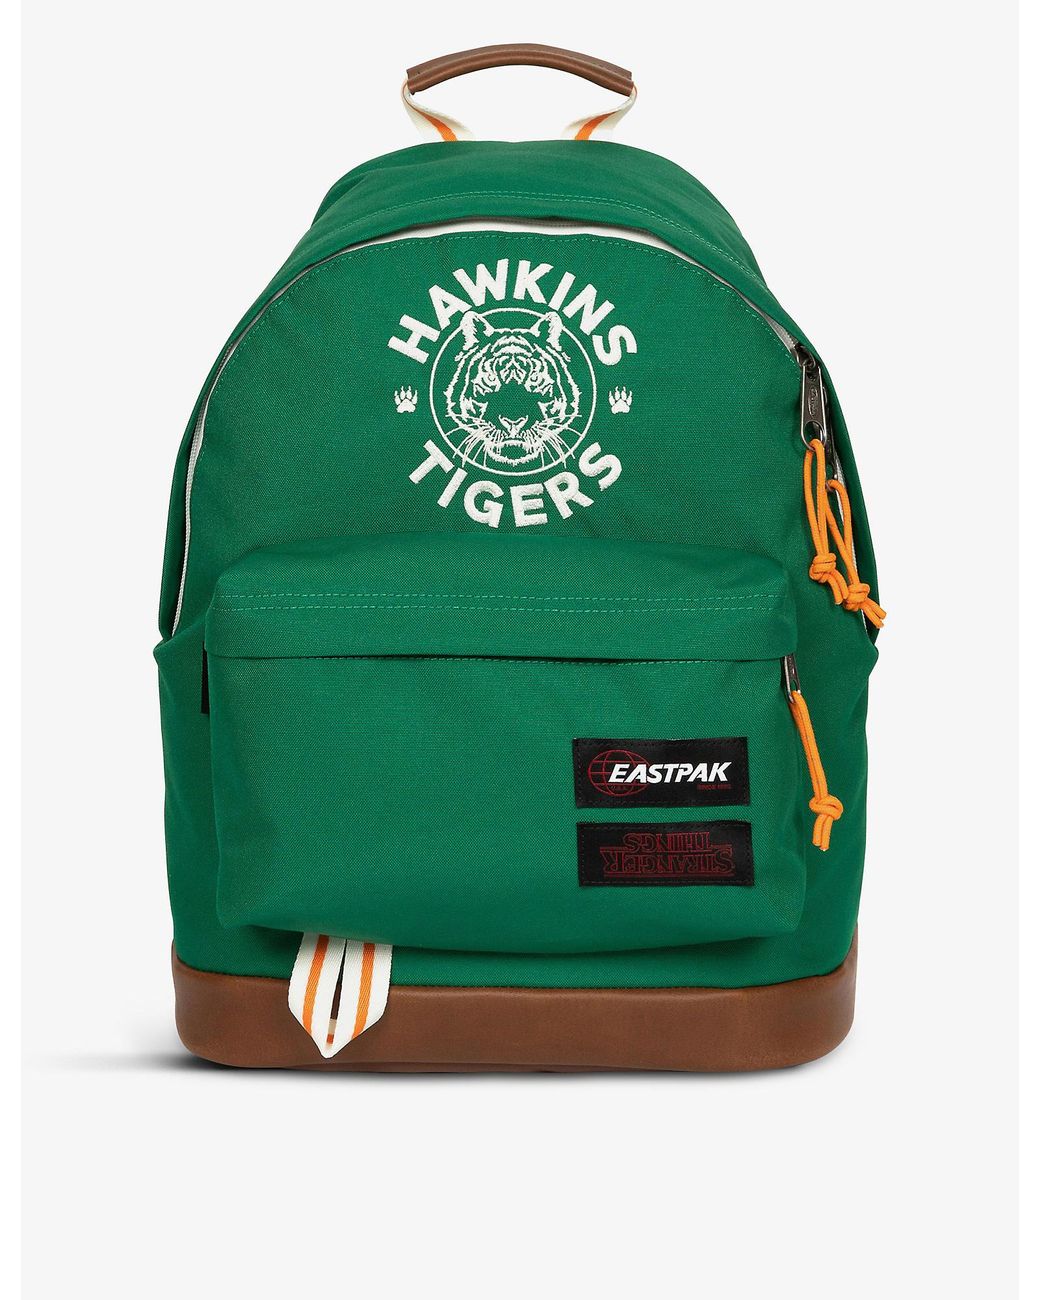 Eastpak Canvas X Stranger Things Wyoming Woven Backpack in Green | Lyst Canada